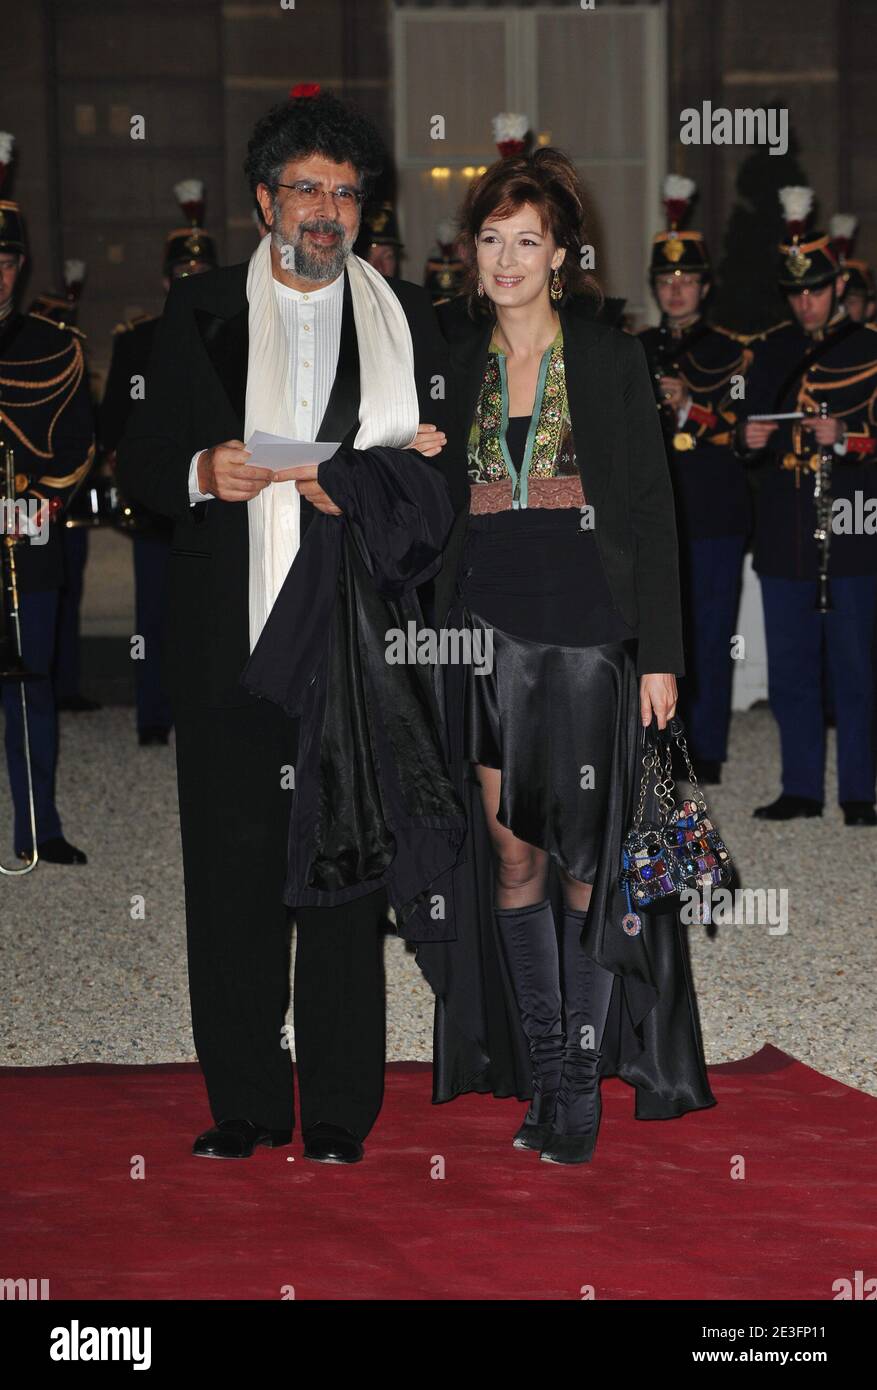 French-Lebanese musician Gabriel Yared and girlfriend Marie-Jeanne Serero arrive for a state dinner given in honor of Lebanese President Michel Sleiman at the Elysee Palace, in Paris, France on March 16, 2009. Michel Sleiman is in France for a three-day state visit focusing on French military and economic assistance to Lebanon, as his country opened today its first ever embassy in former powerbroker Syria and gears for legislative elections in June 2009. Photo by Abd Rabbo-Mousse-Orban/ABACAPRESS.COM Stock Photo